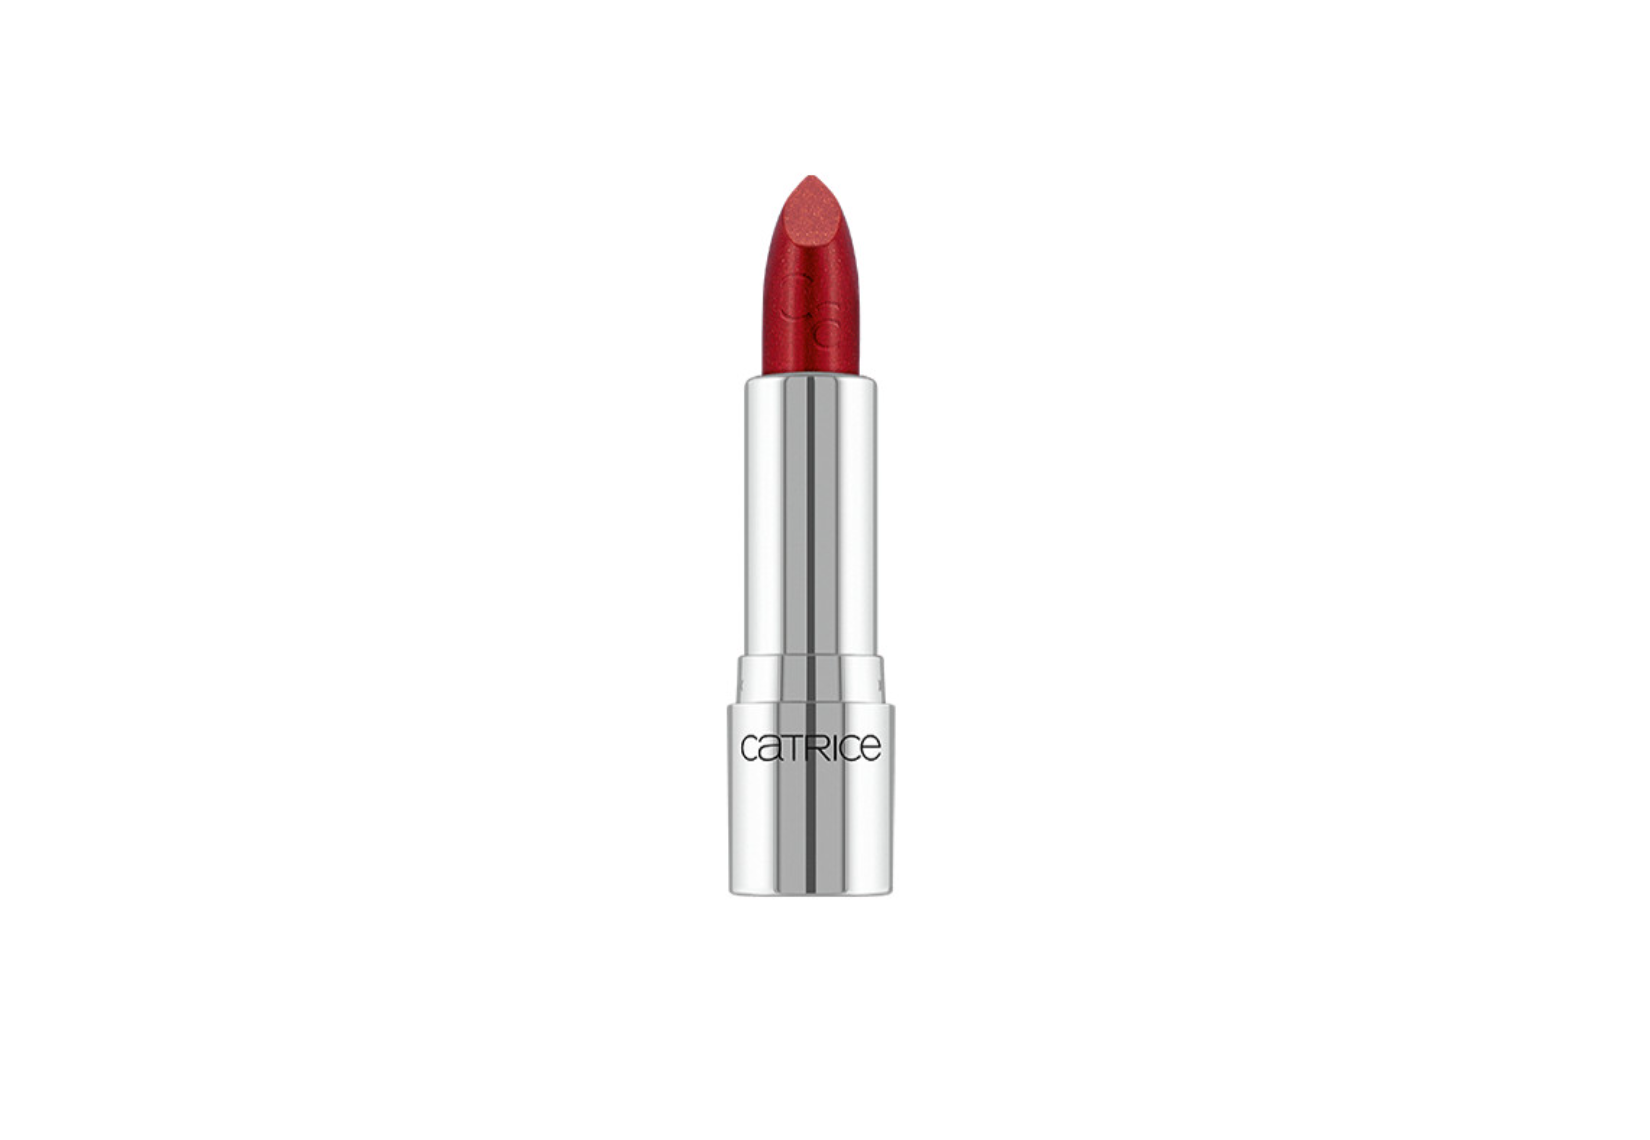 This lipstick is available in various shades.